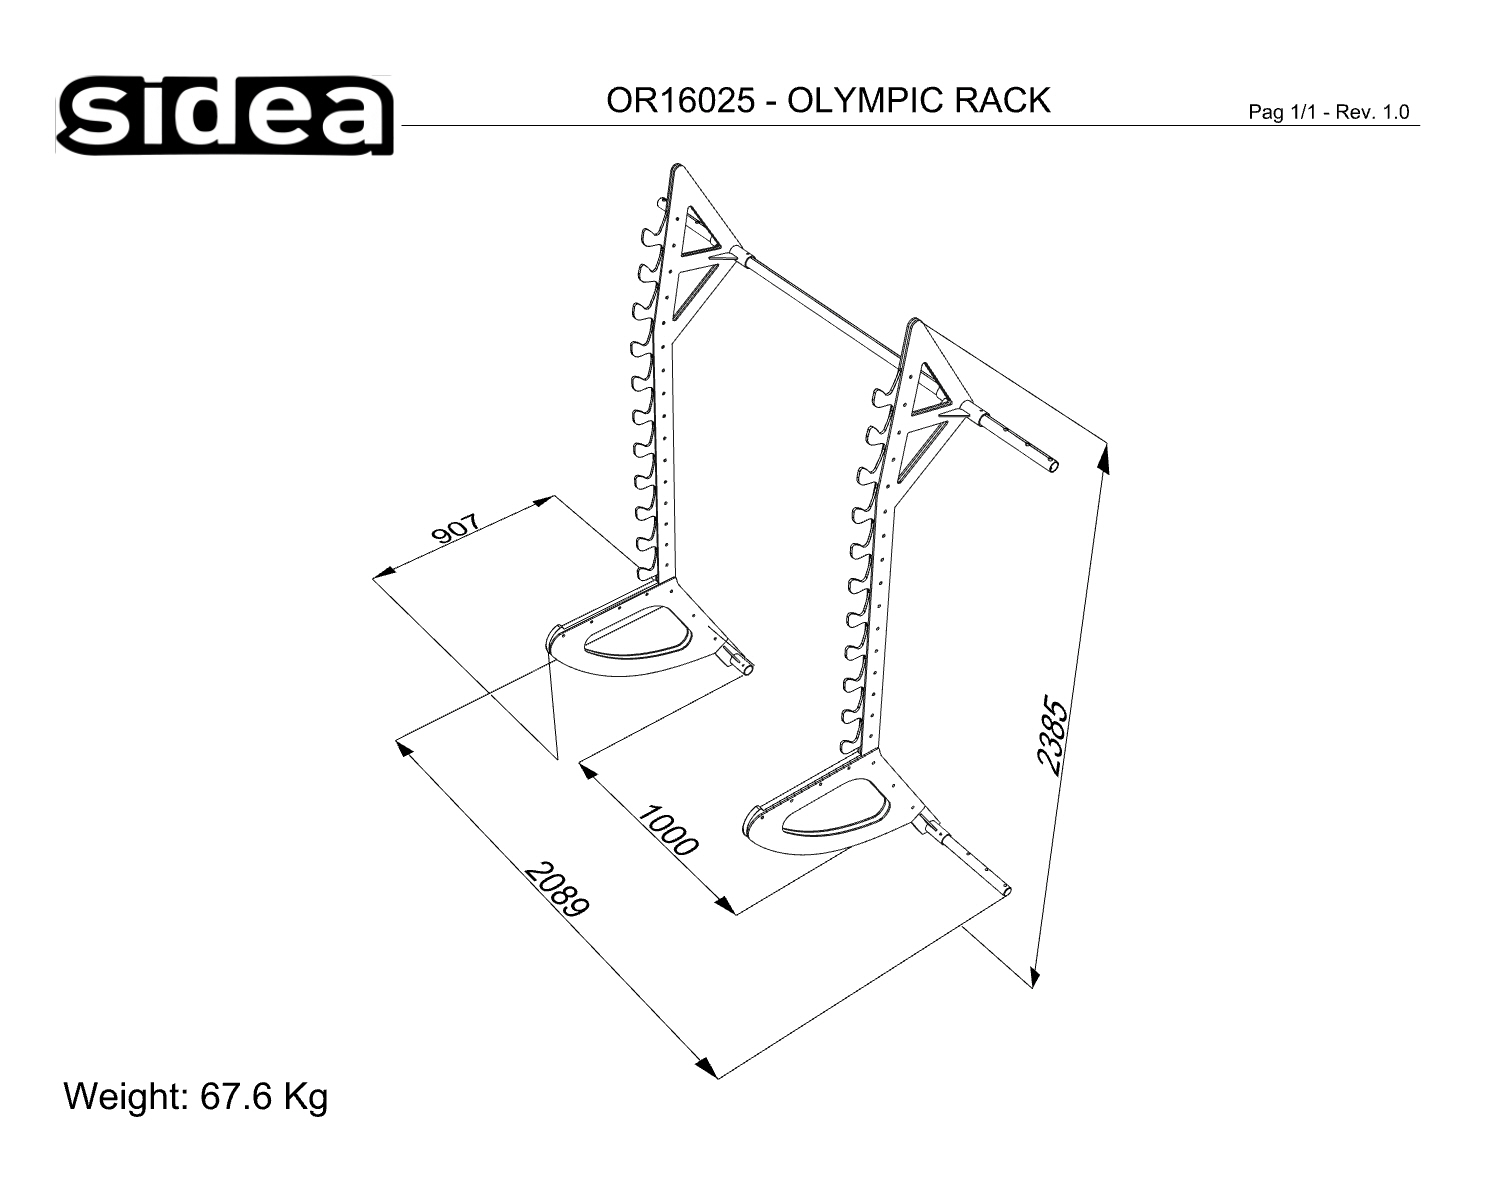 OR16025S - OLYMPIC RACK - QUOTE